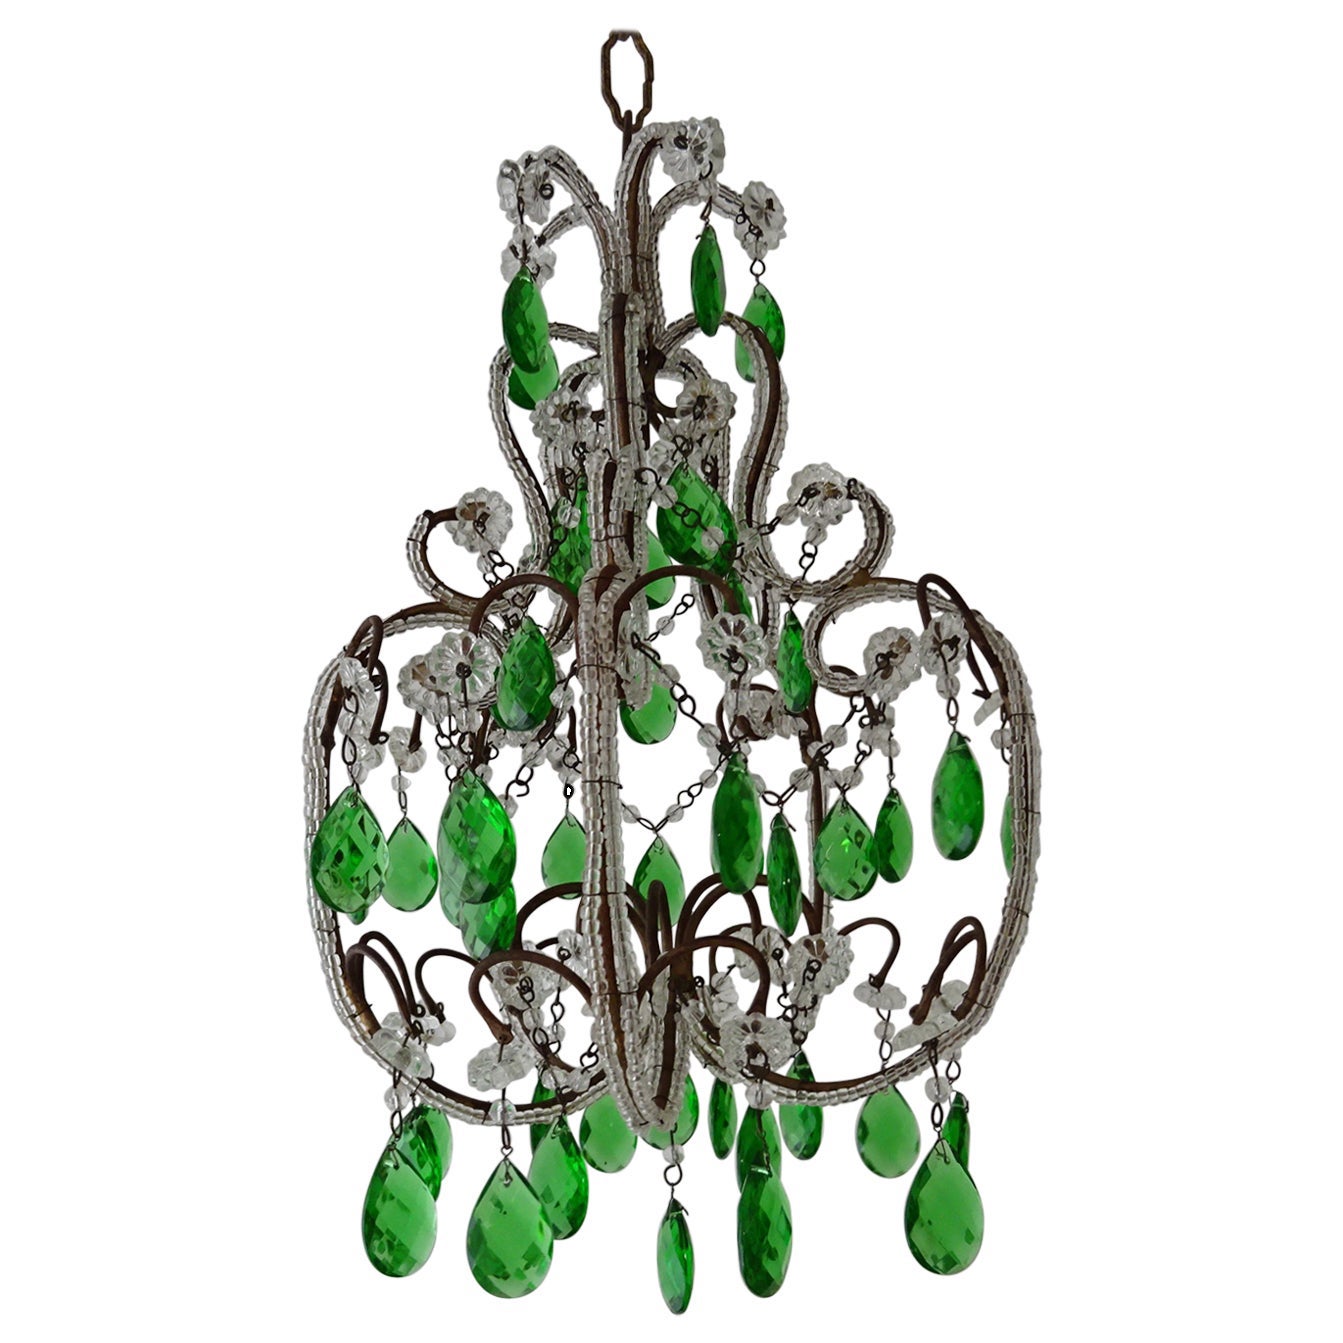 French Beaded Emerald Green Prisms Petit Beaded Small Chandelier, circa 1920